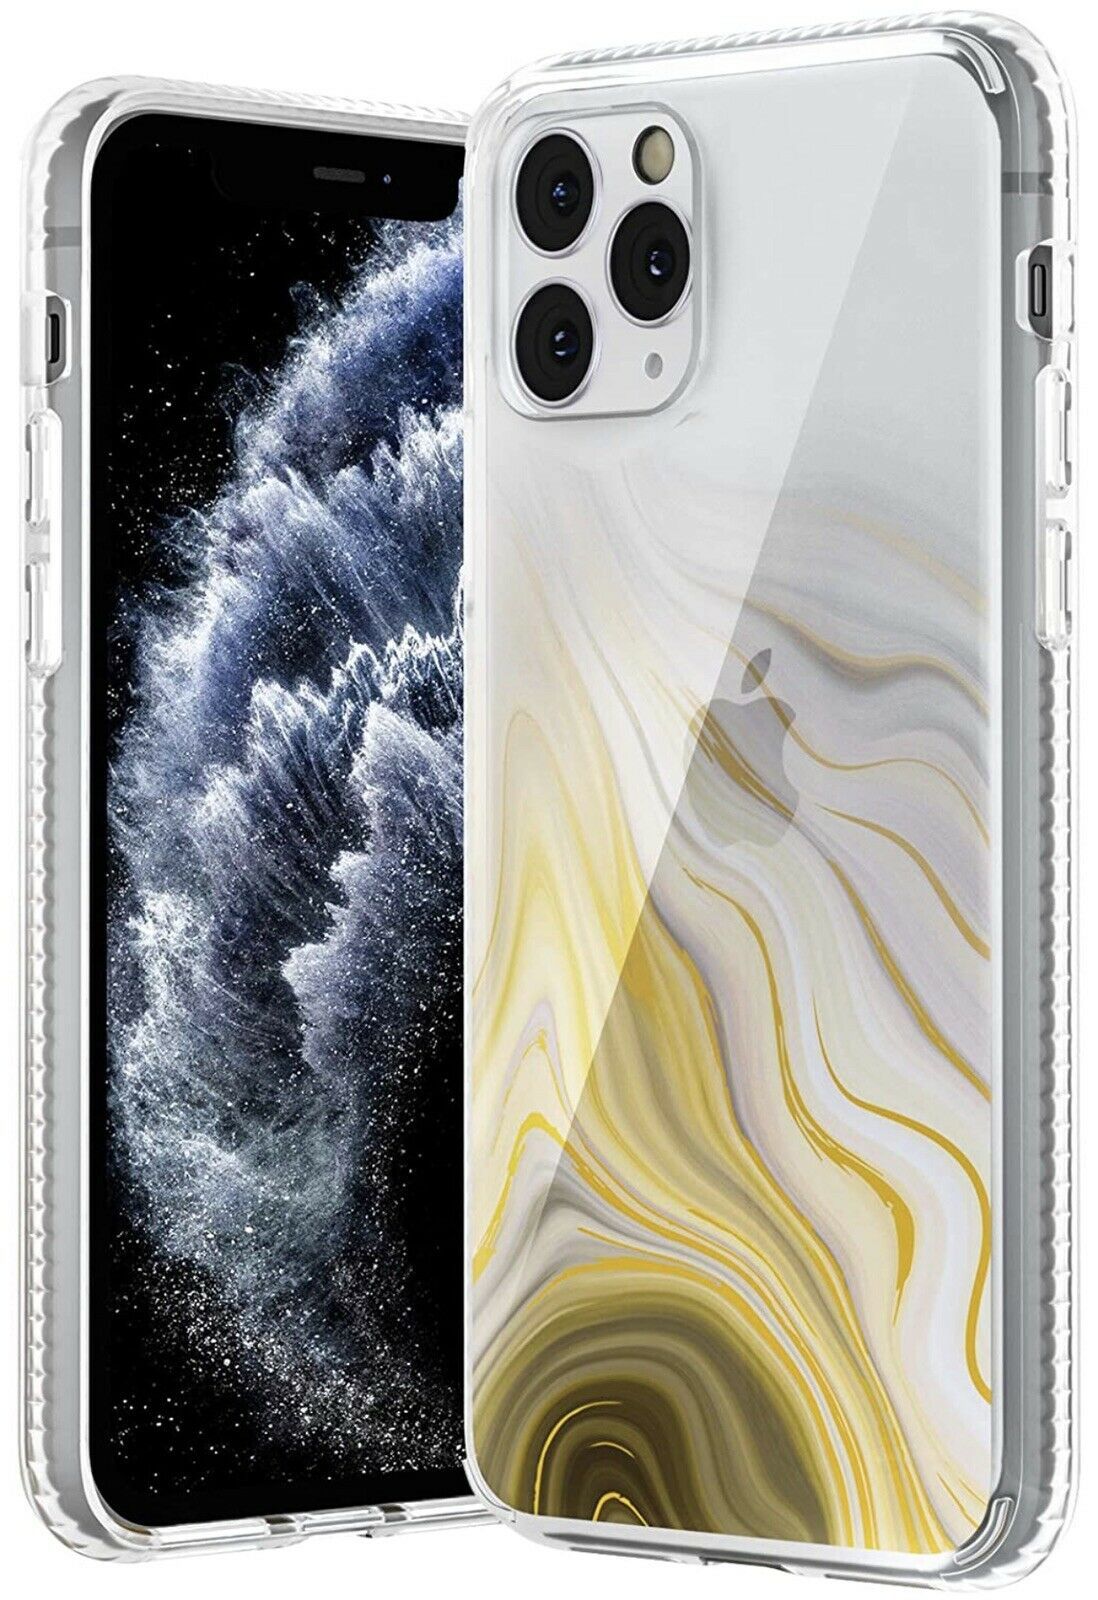 Stylish iPhone Case Designed for Apple iPhone 11 Pro Max(2019) 6.5 Inch Anti-Scr - $7.99